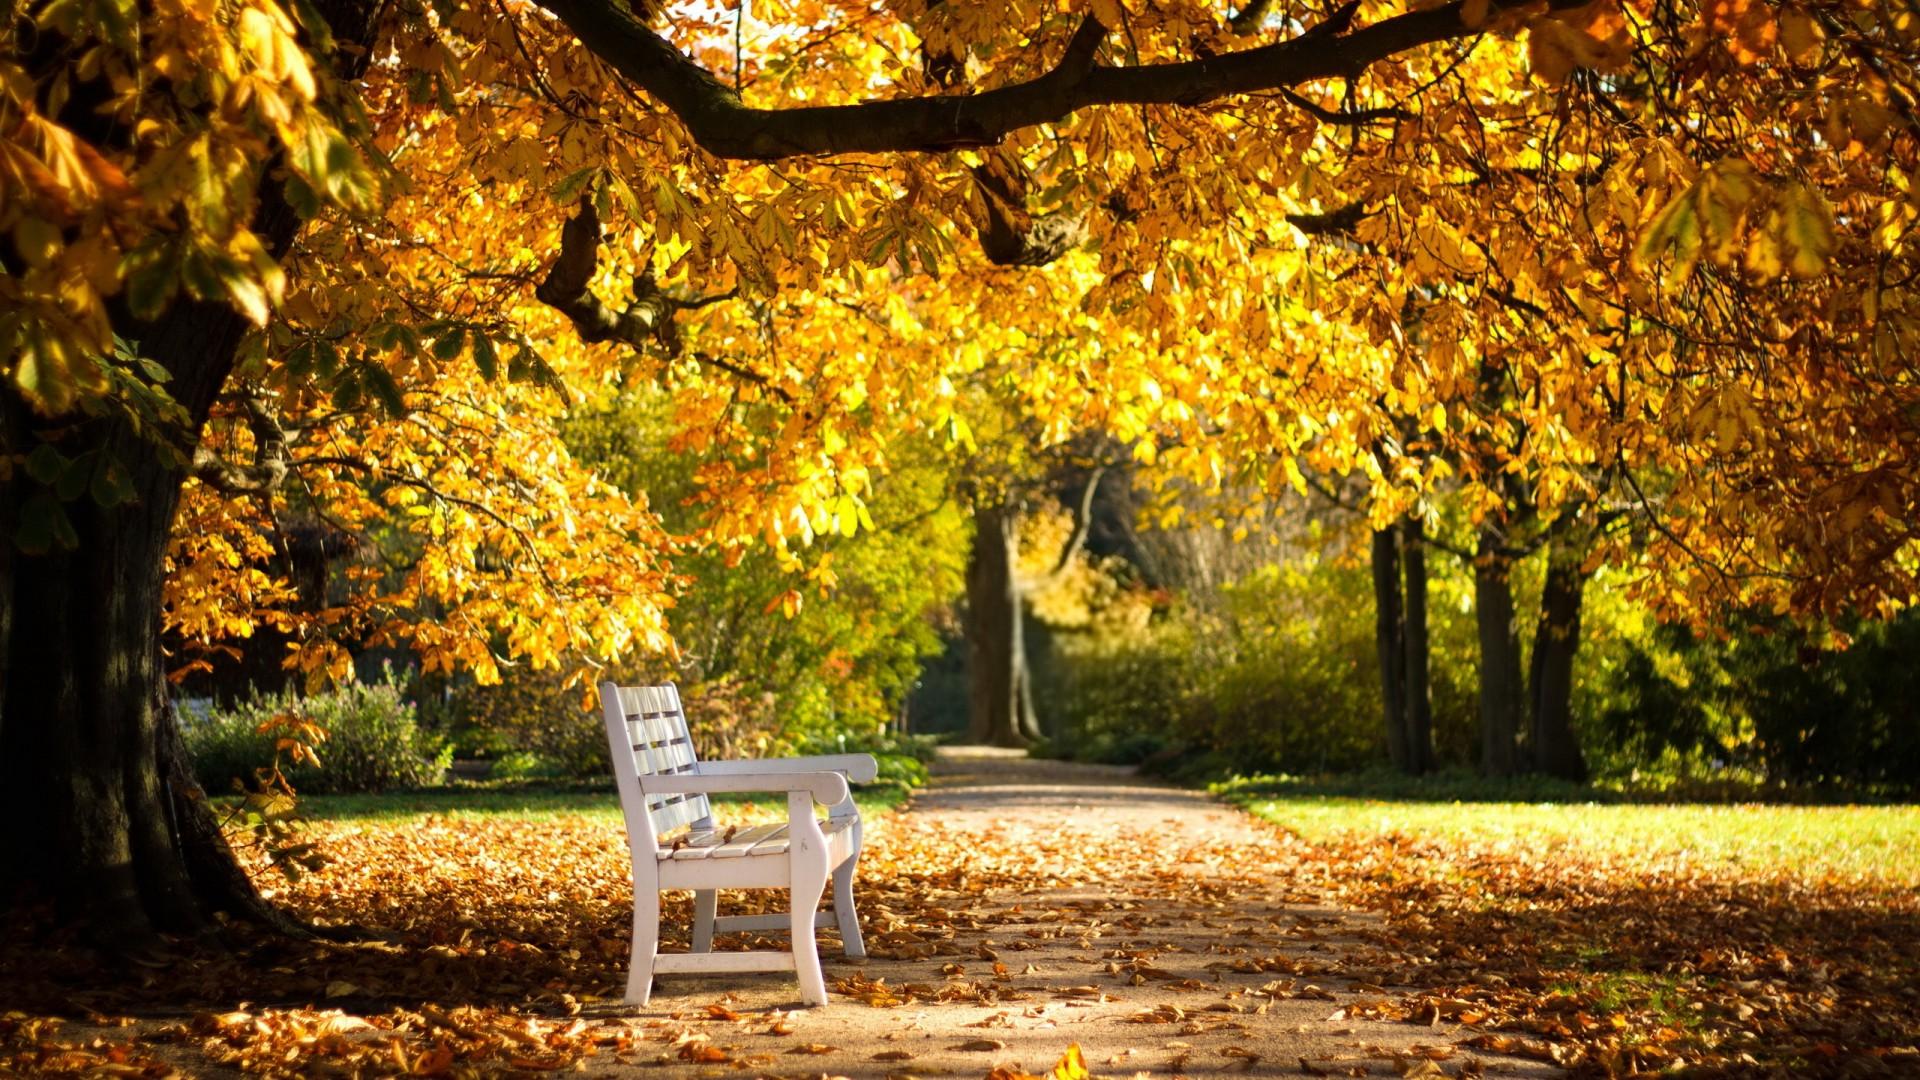 Autumn Leaves And Bench - HD Wallpaper 